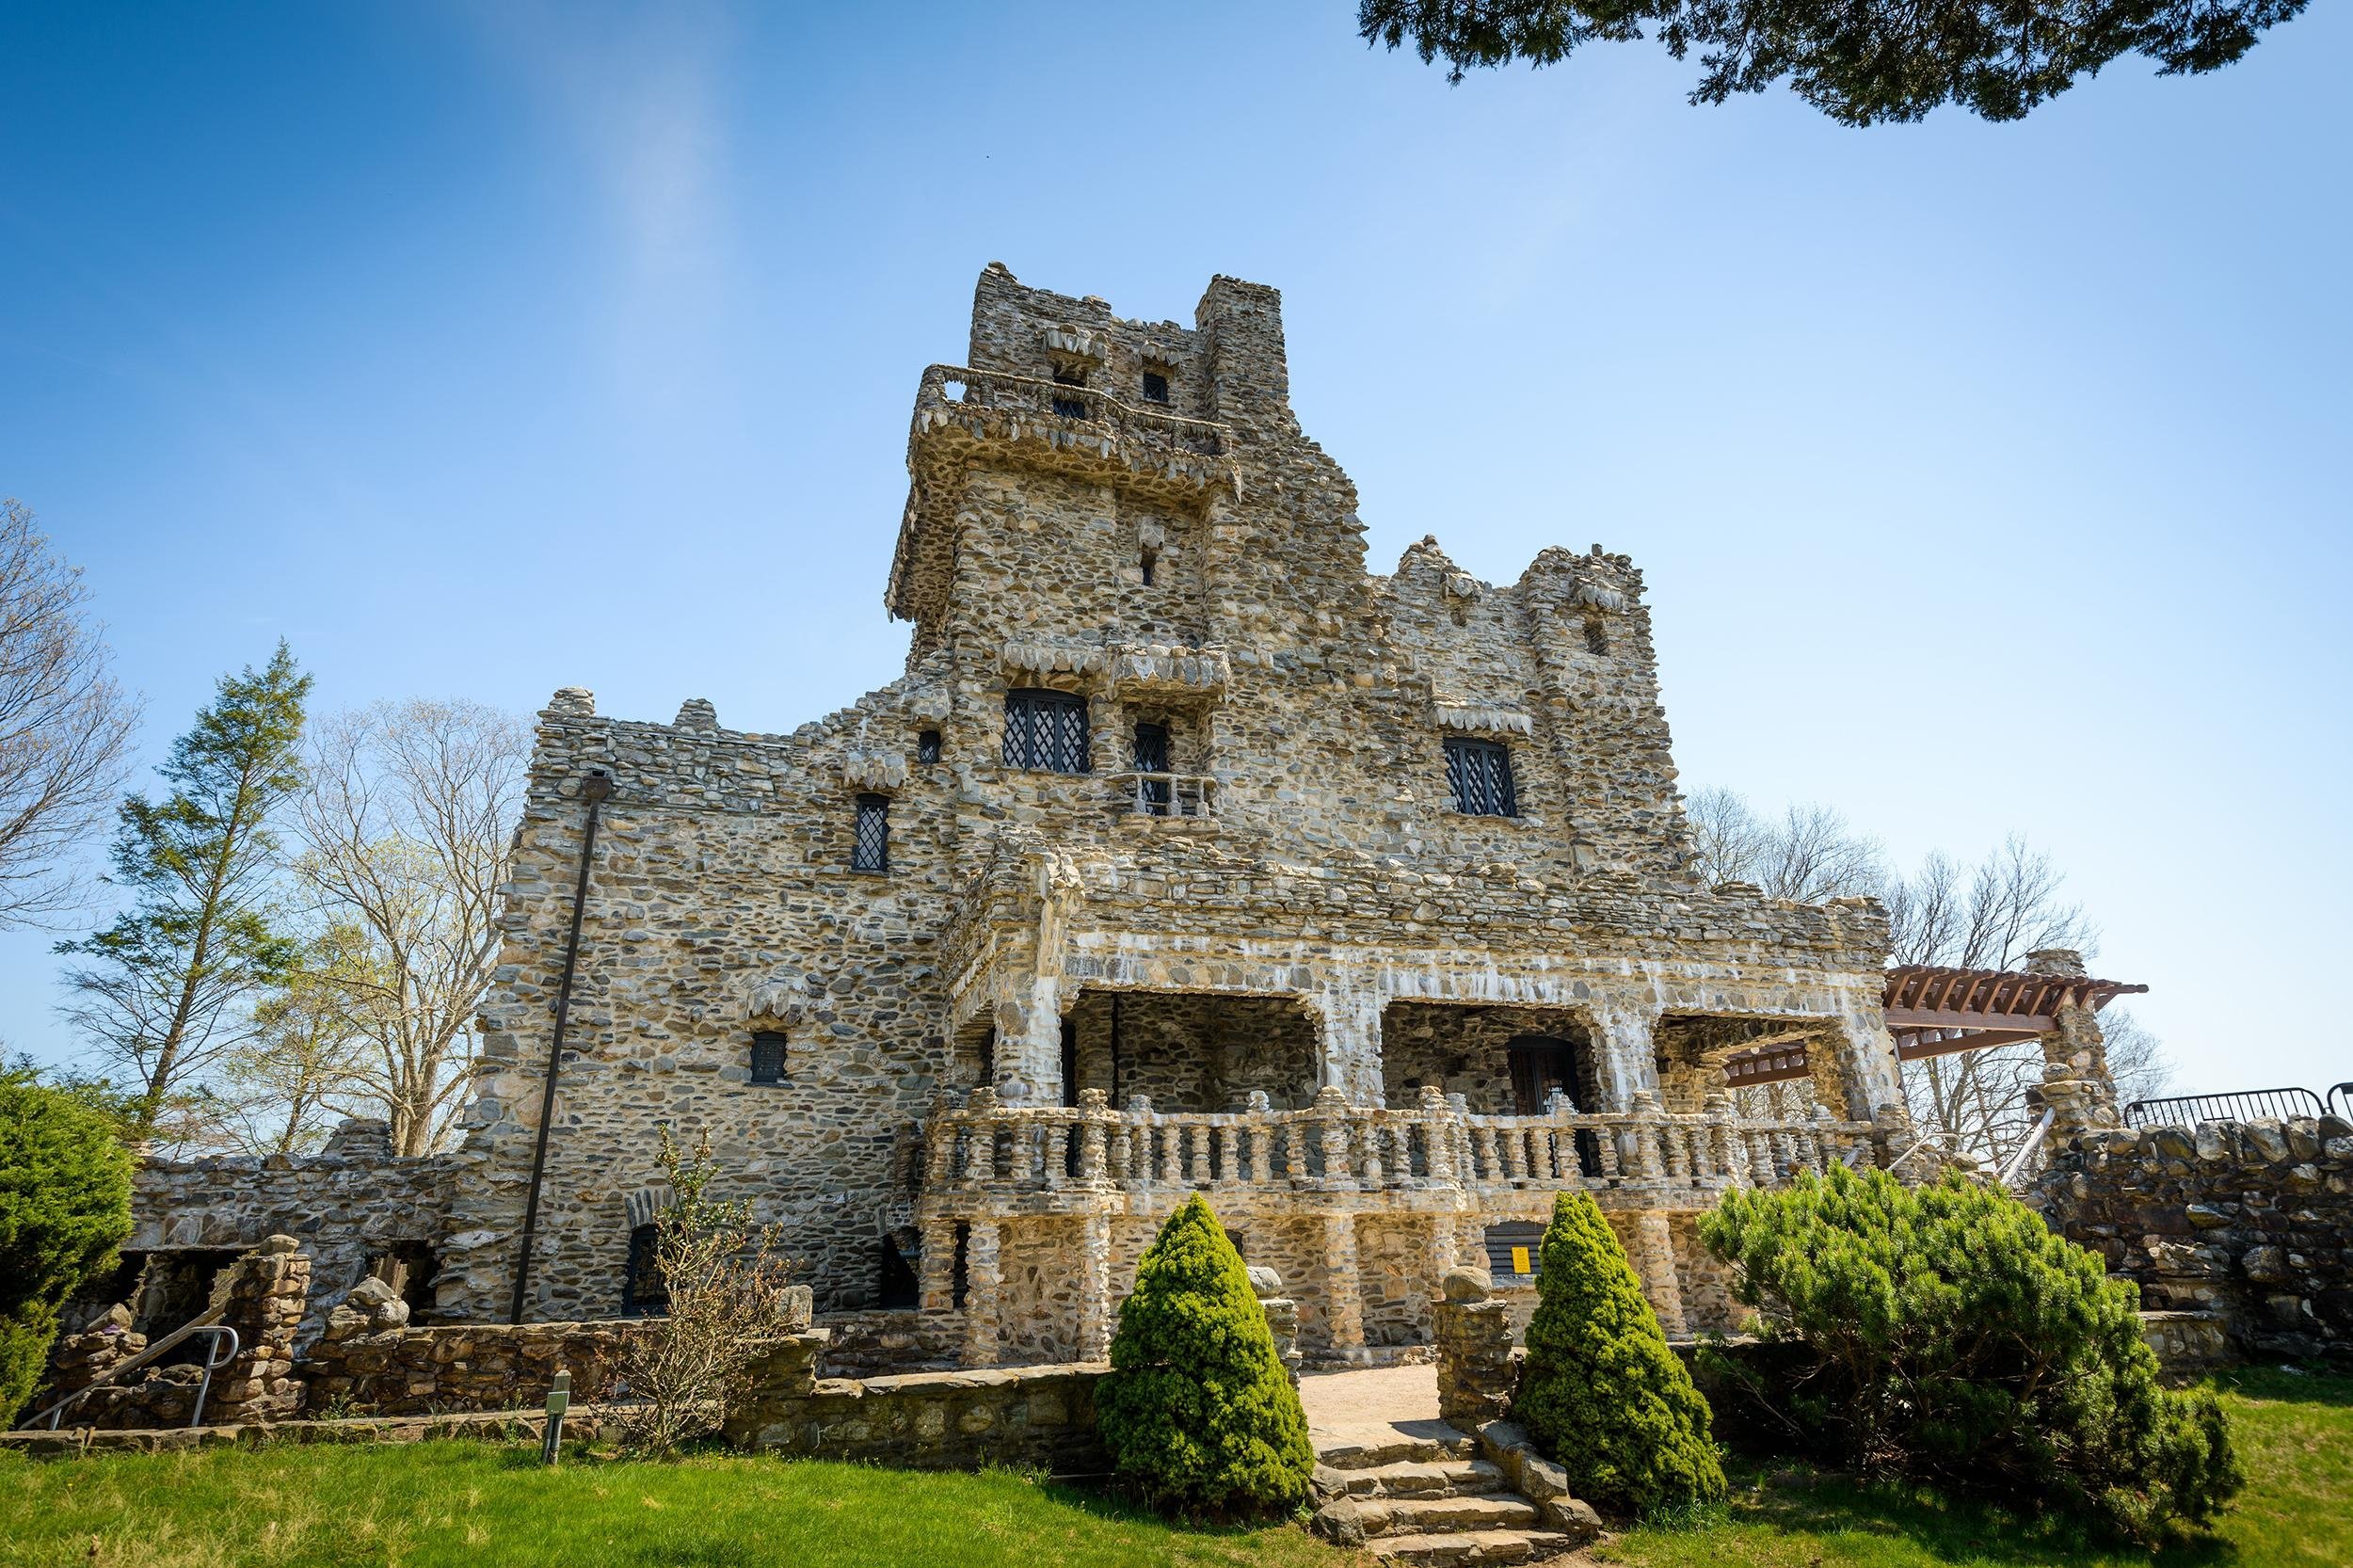 <p>Potential visitors to Connecticut may not be able to rattle off many photo ops in the Nutmeg State, but residents know plenty of sights worth exploring and photographing. One fascinating place for a selfie: Gillette Castle State Park. The historic mansion on the grounds resembles a medieval fortress.</p>